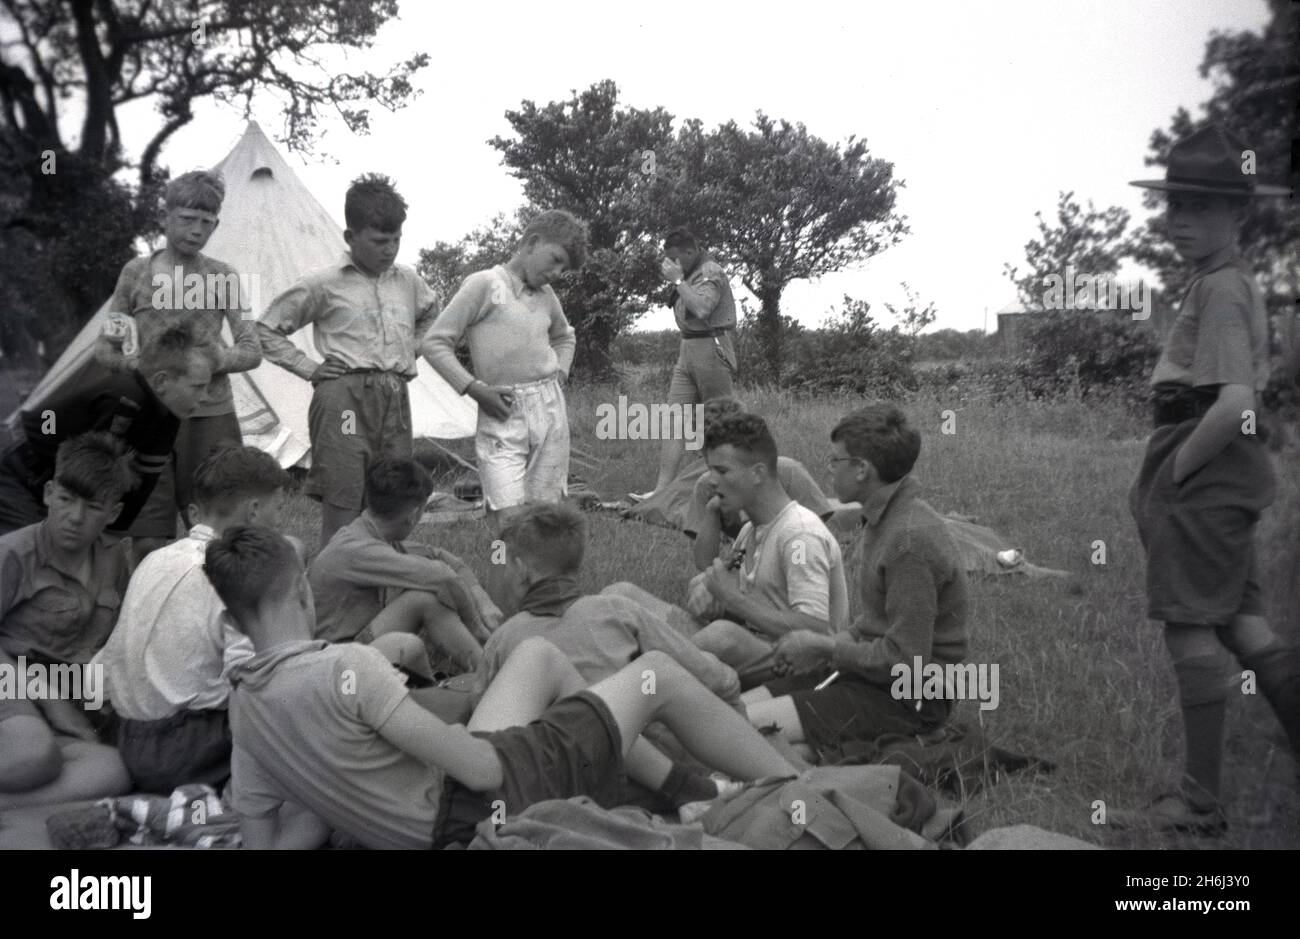 1938, historical, a scout camp, outside in a field, a group of cub scouts listening to an older boy playing a ukulele, Felbridge, Surrey, England, UK. Scouting began in 1908, after  Britsh Army Officer, Robert Baden-Powell held an experimental camp on Brownsea Island, Poole Harbour, the previous summer. Around 20 boys attended and were taught a range of outdoor skills, including tracking, firelighting, making shelters out of branches, knotting, cooking, health and sanitation, life-saving and First Aid. Baden-Powell's famous book, 'Scouting for Boys', was first published in 1908. Stock Photo